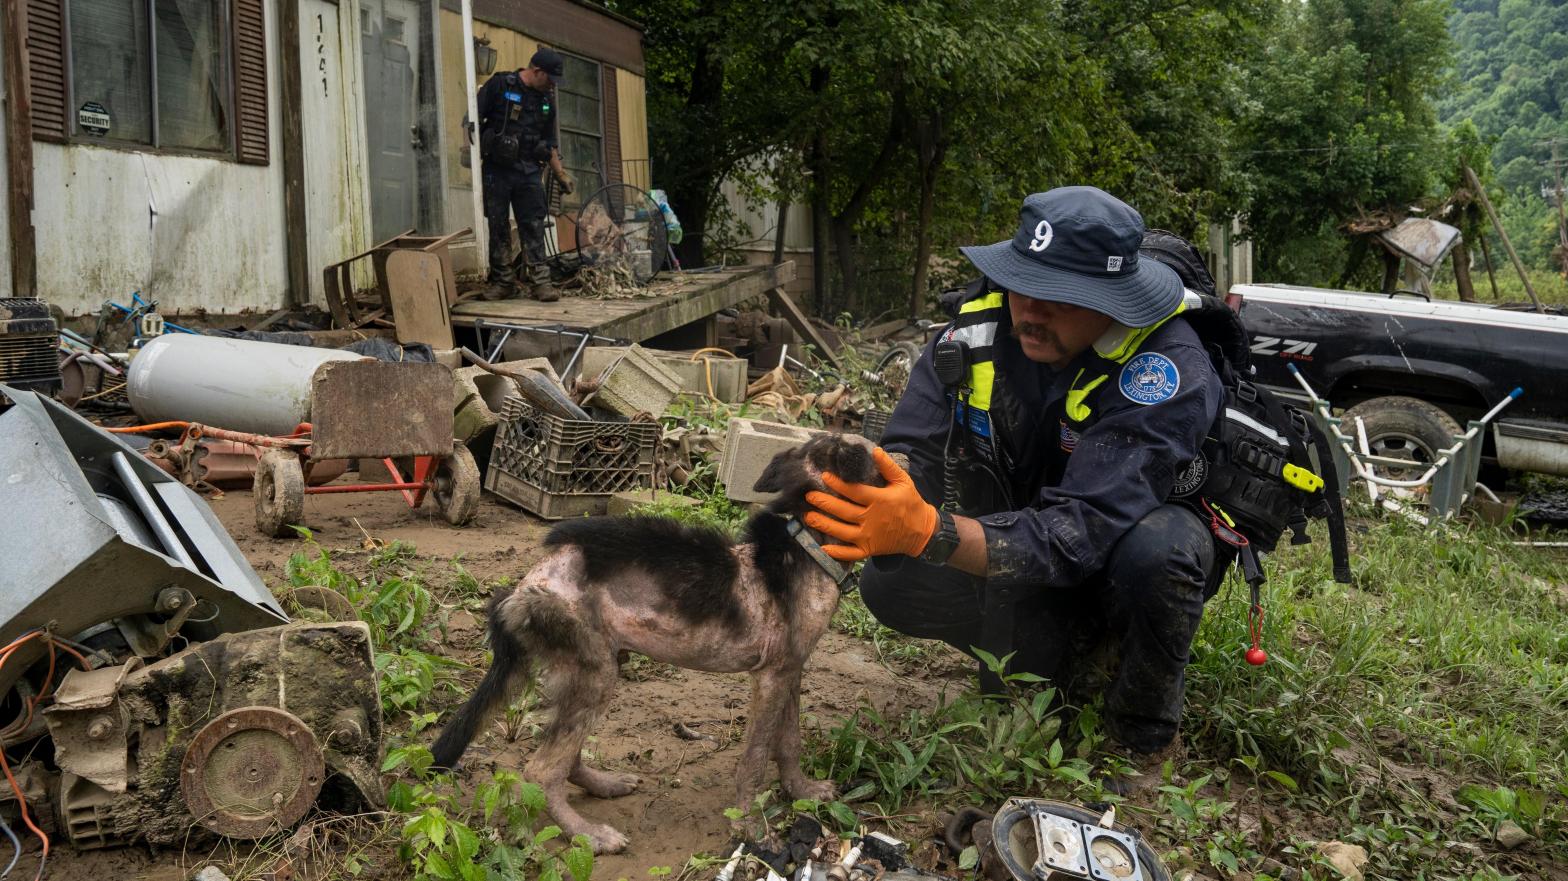 A firefighter from the Lexington Fire Department Search and Rescue team  checks on a dog during a targeted search on Highway 476 where three  people are still unaccounted for on July 31, 2022 near Jackson,  Kentucky. (Photo: Michael Swensen, Getty Images)